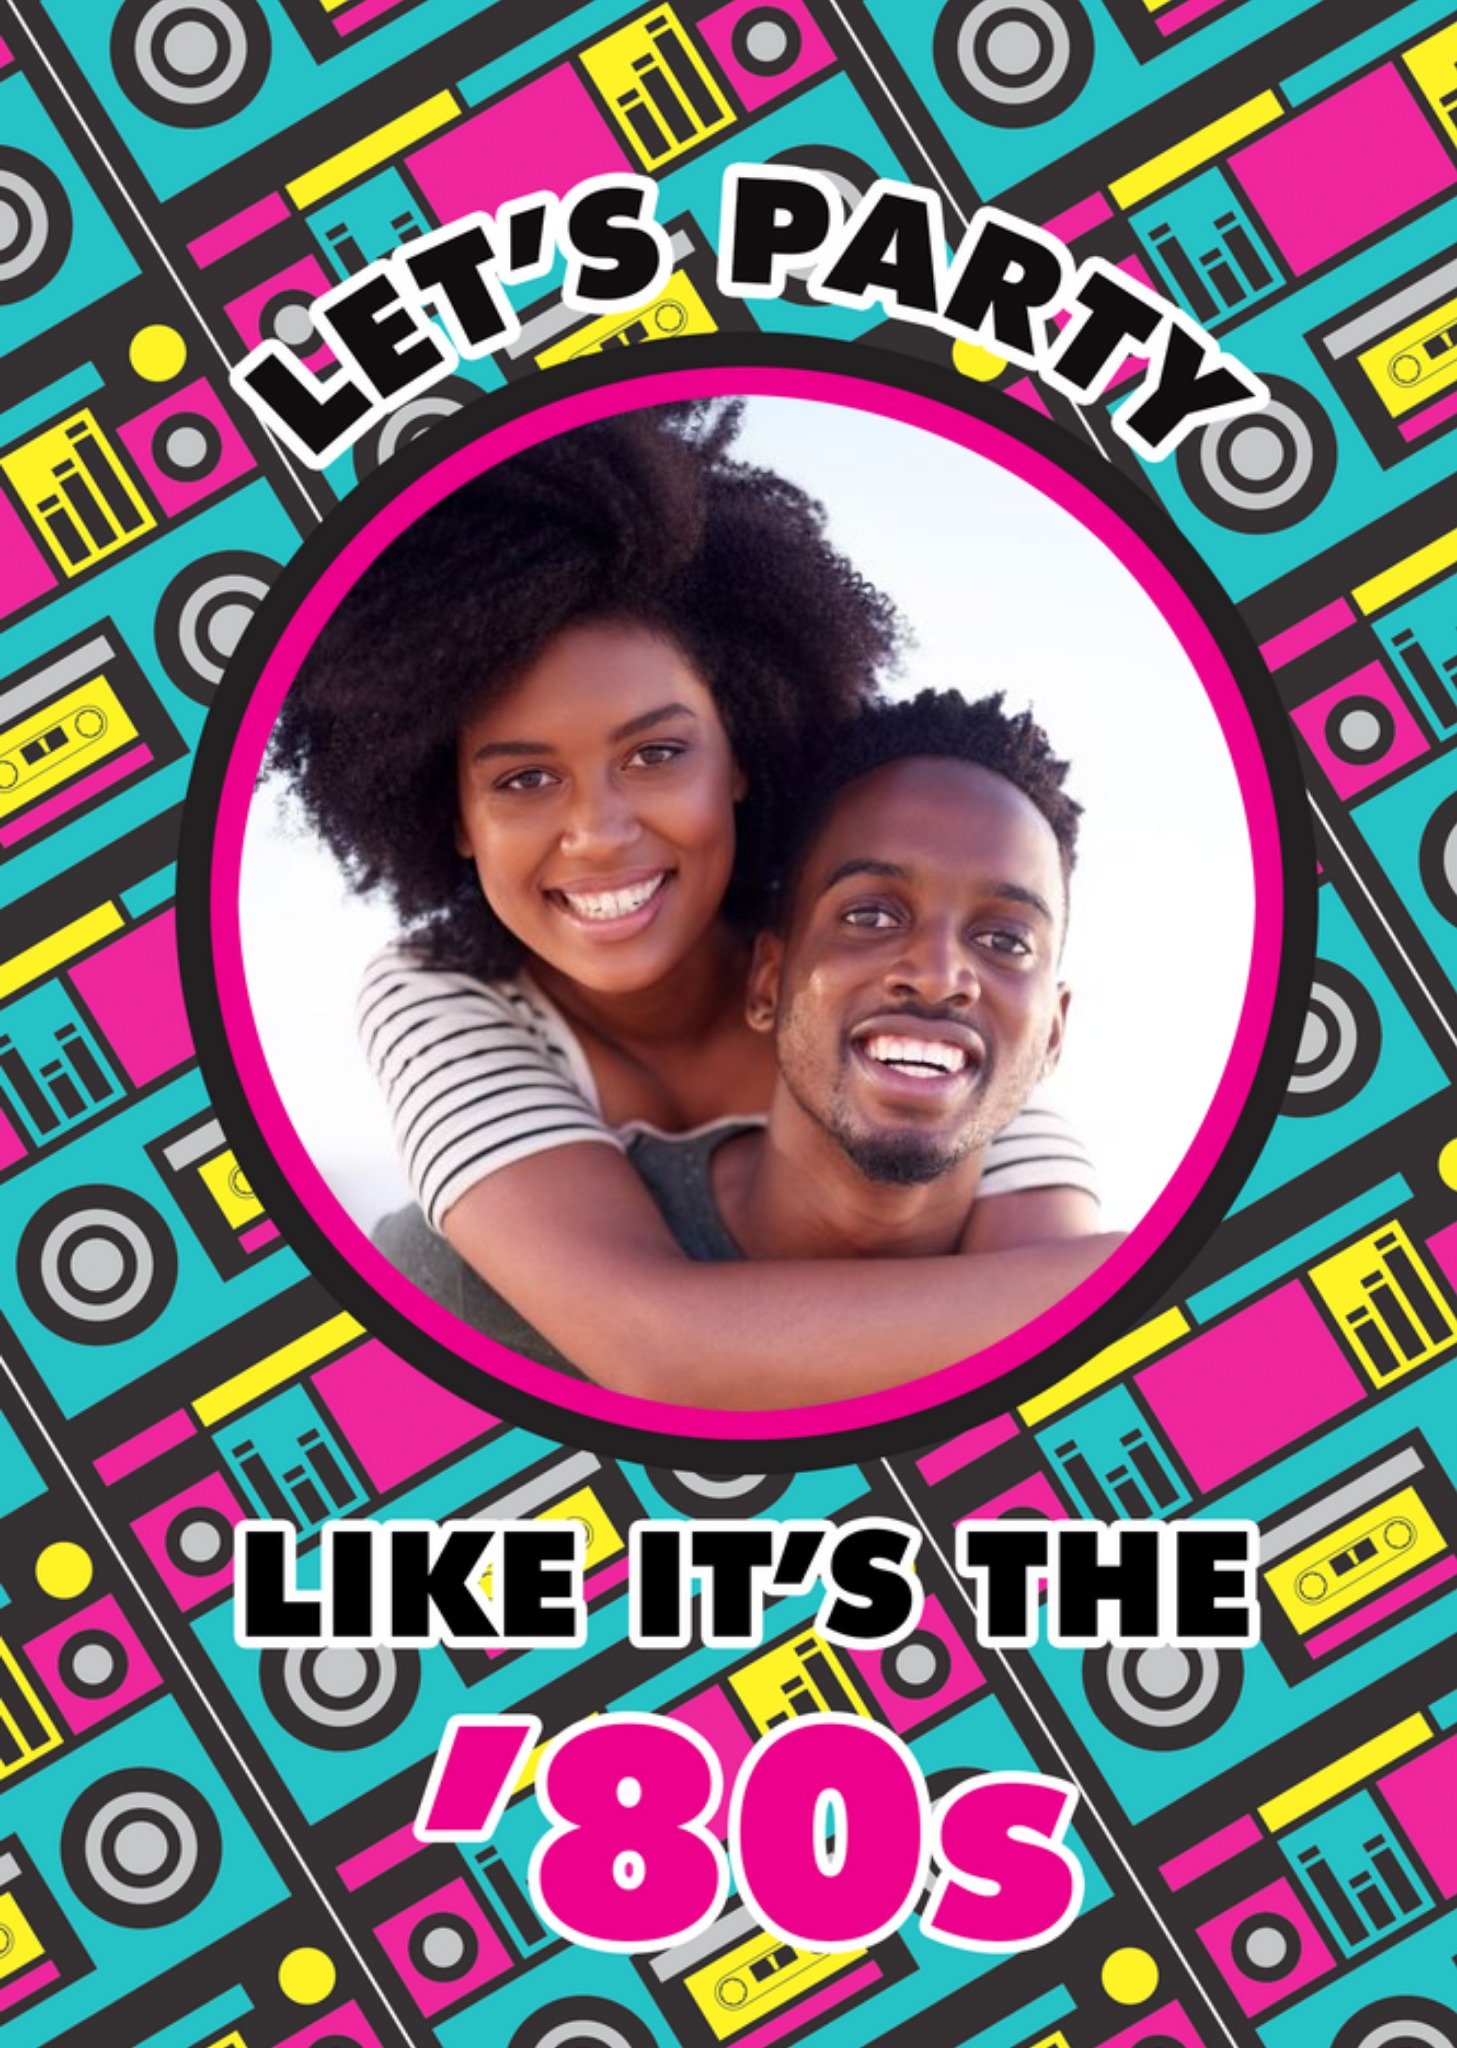 Nickelodeon Mtv Classic Let's Party Like It's The 80S Retro Photo Upload Birthday Card Ecard